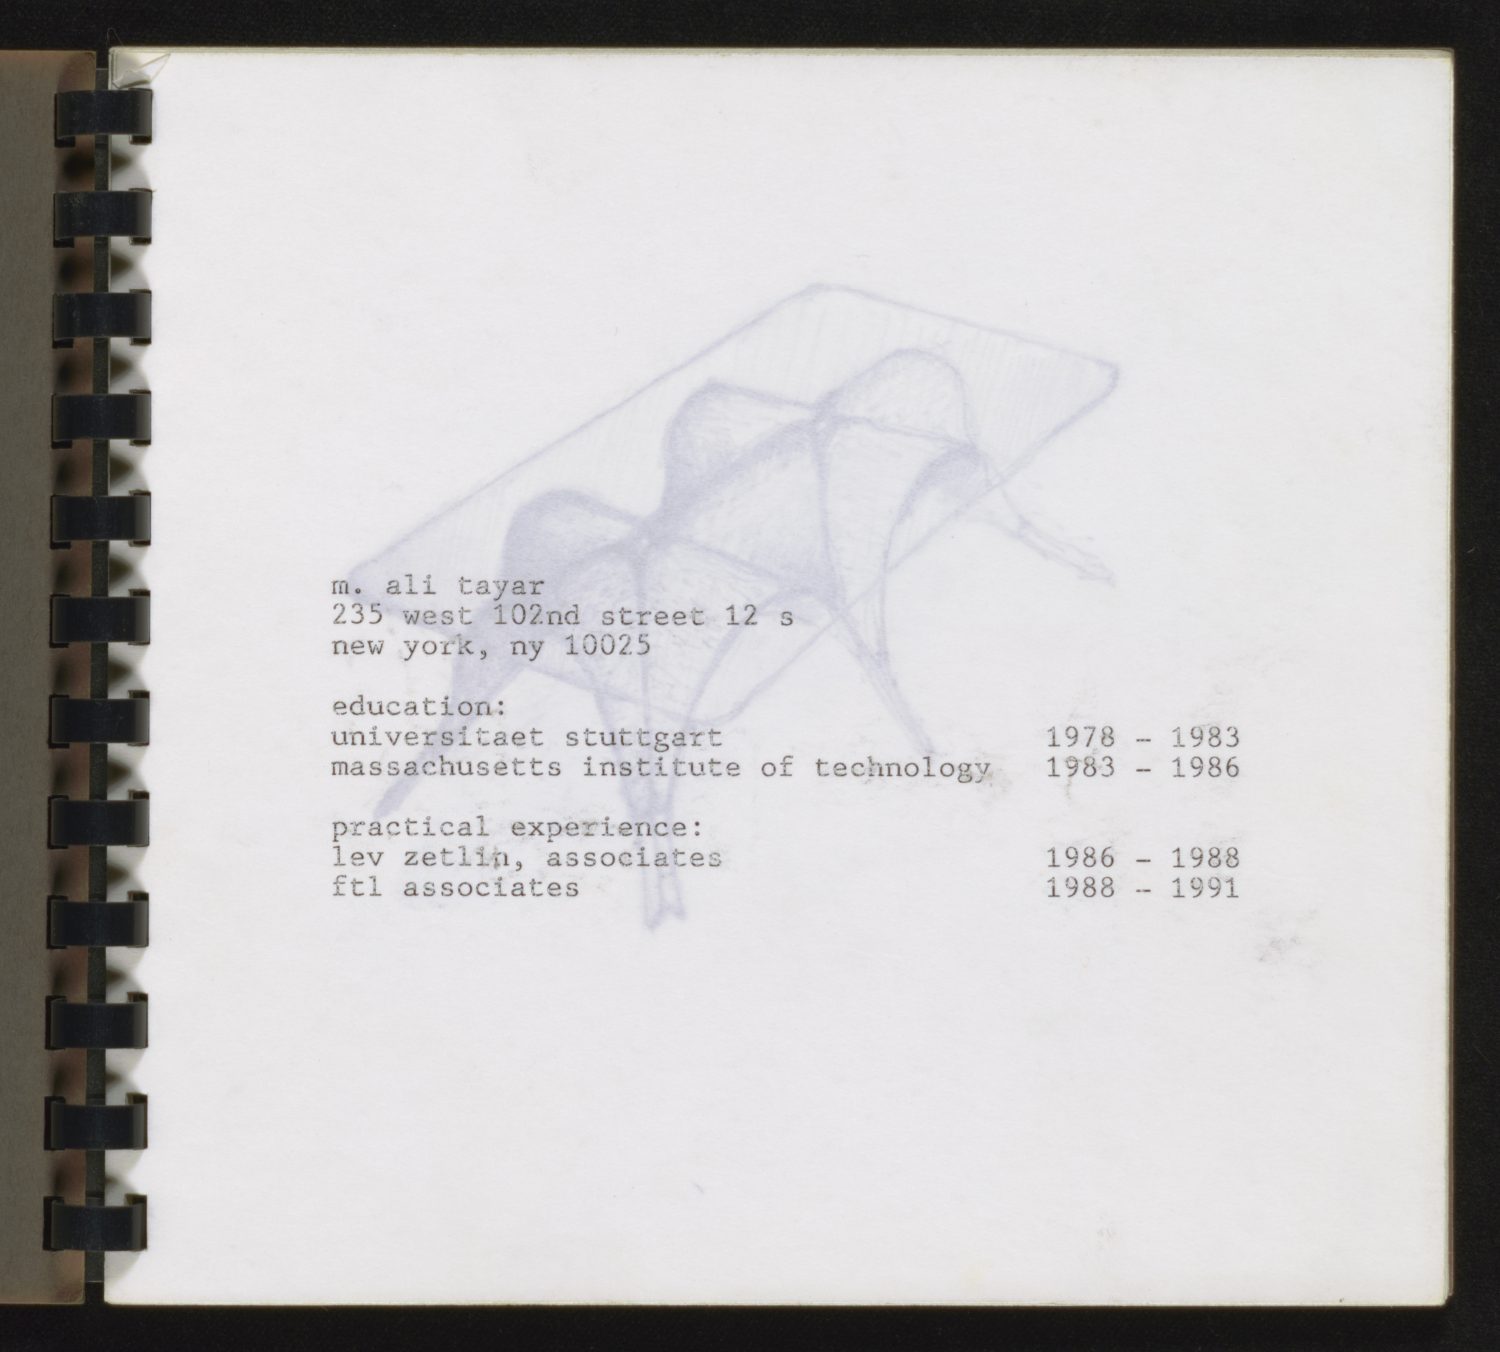 Ali Tayar - This booklet contains a brief curriculum vitae detailing Ali Tayar's education and architectural career through approximately 1992. Also present are several pages of sketches depicting pieces of furniture that Tayar would later construct under commission for various clients, including the "Stackable Shelving System" and "Niloo's Cut-out Table."